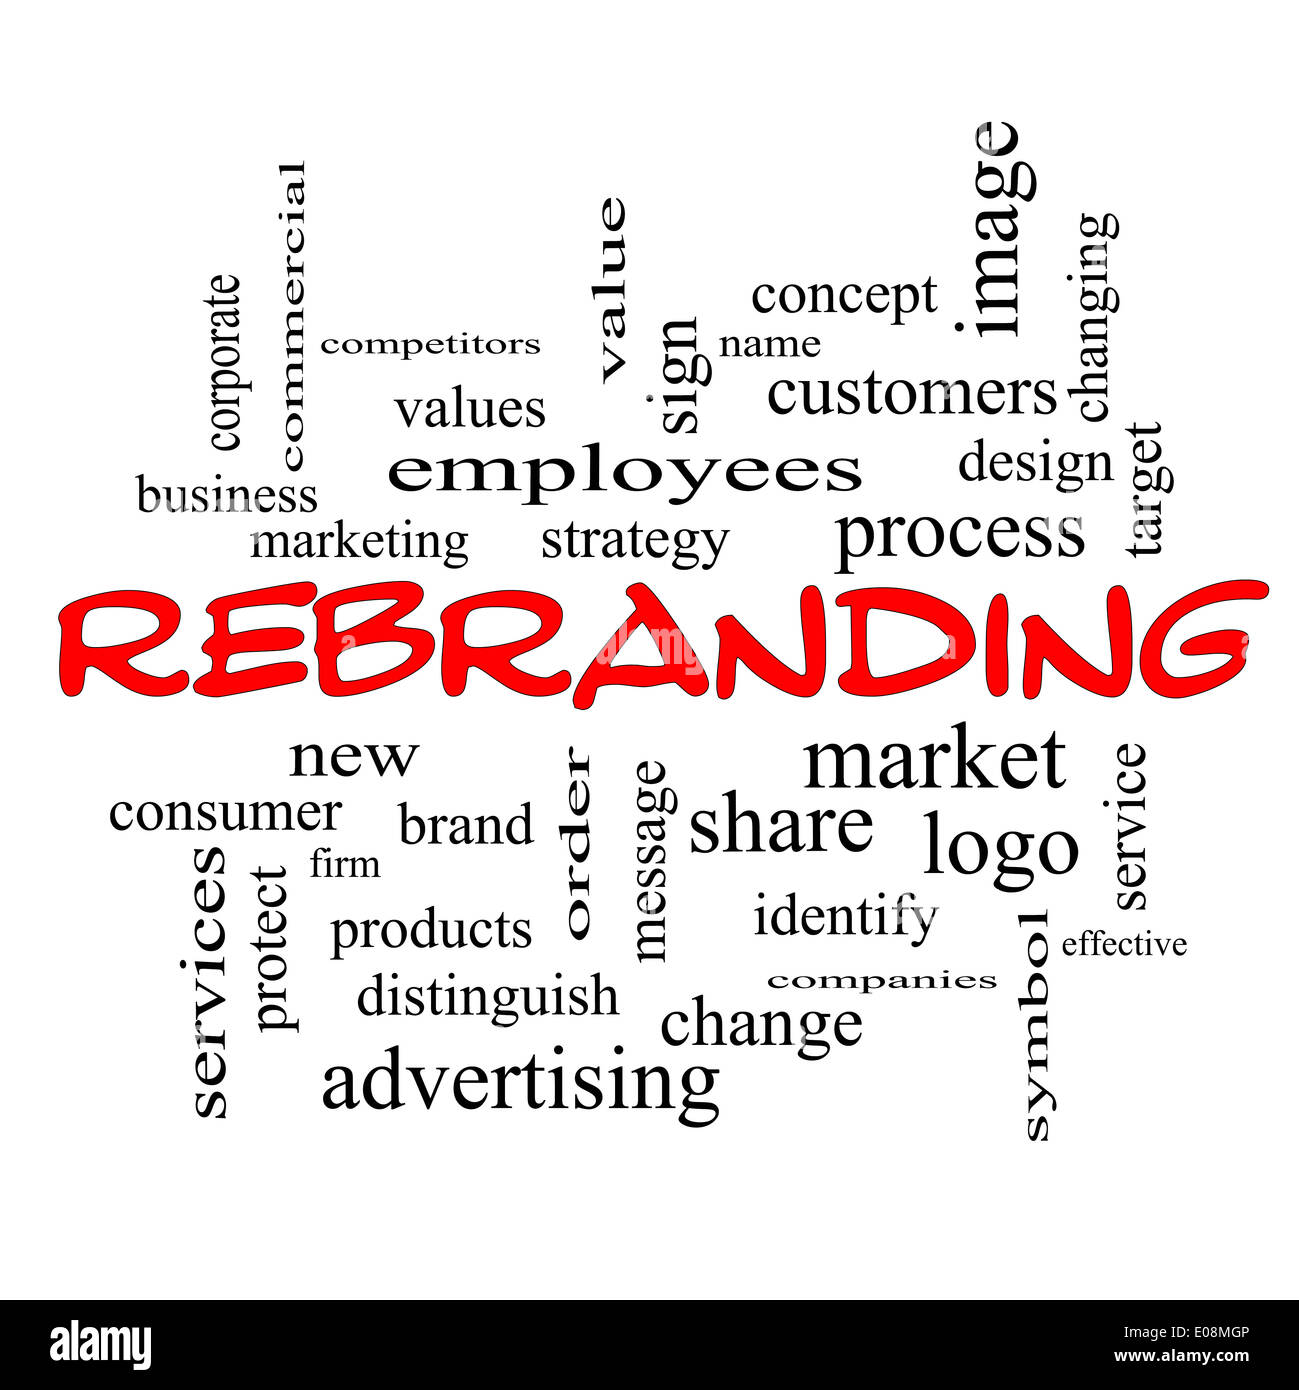 Rebranding Word Cloud Concept in red caps with great terms such as market, business, logo and more. Stock Photo